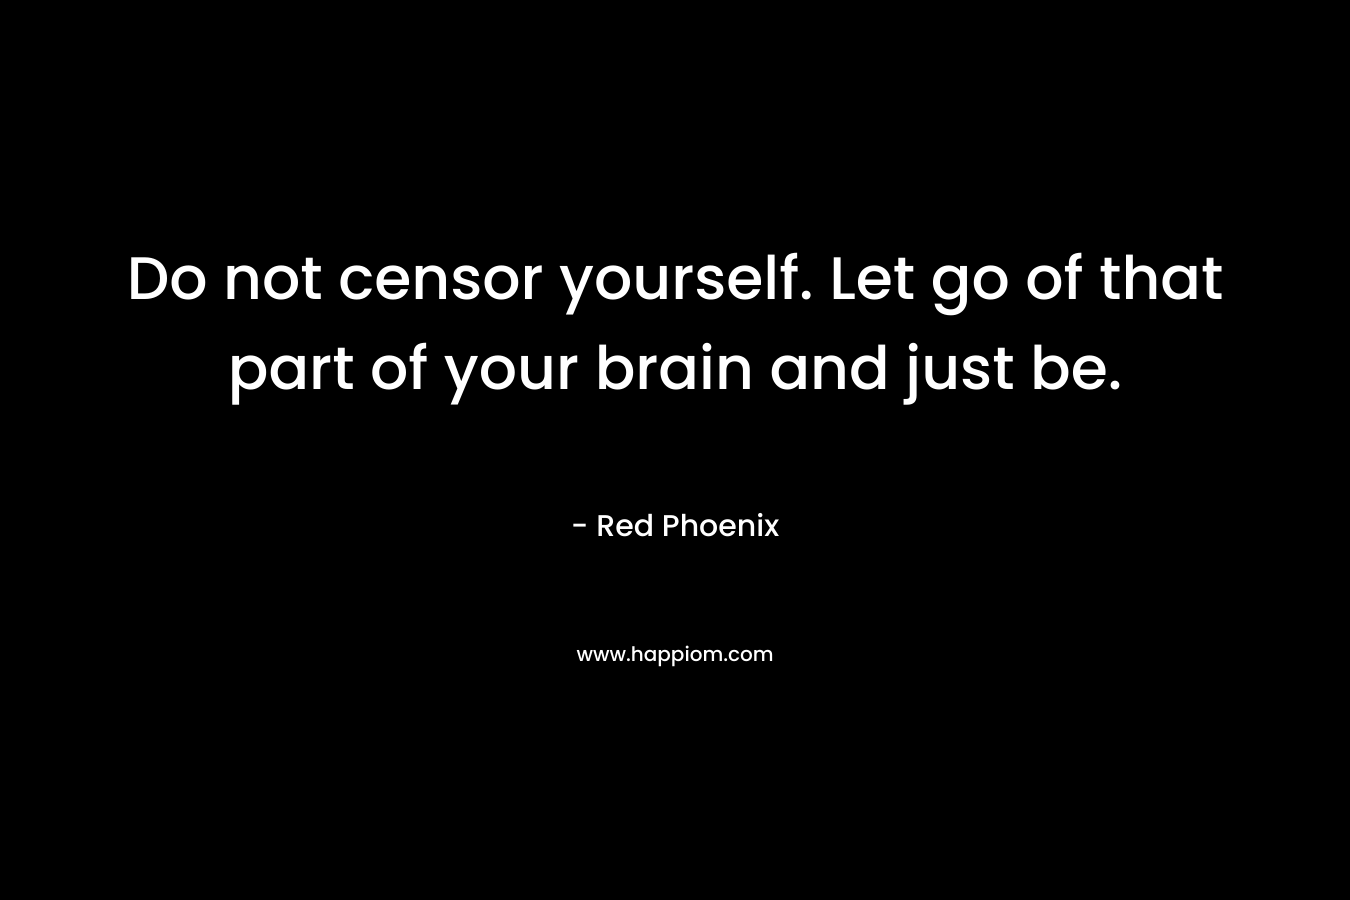 Do not censor yourself. Let go of that part of your brain and just be.